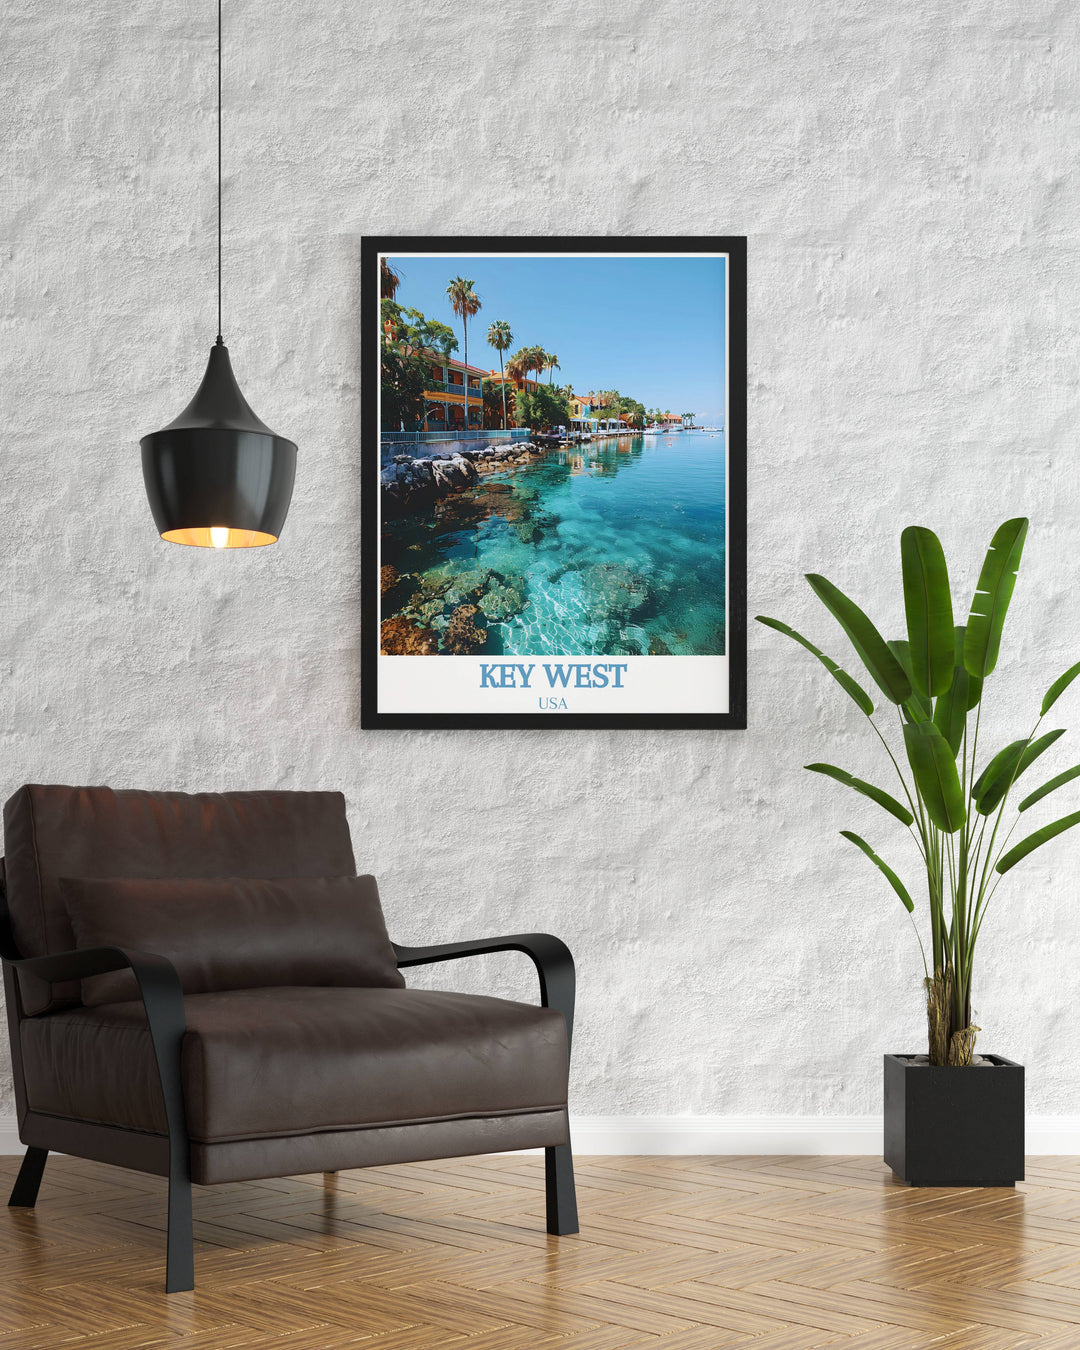 Unique Florida Travel Gift featuring a detailed print of the Key West Historic Seaport ideal for sharing the beauty of Florida with loved ones.